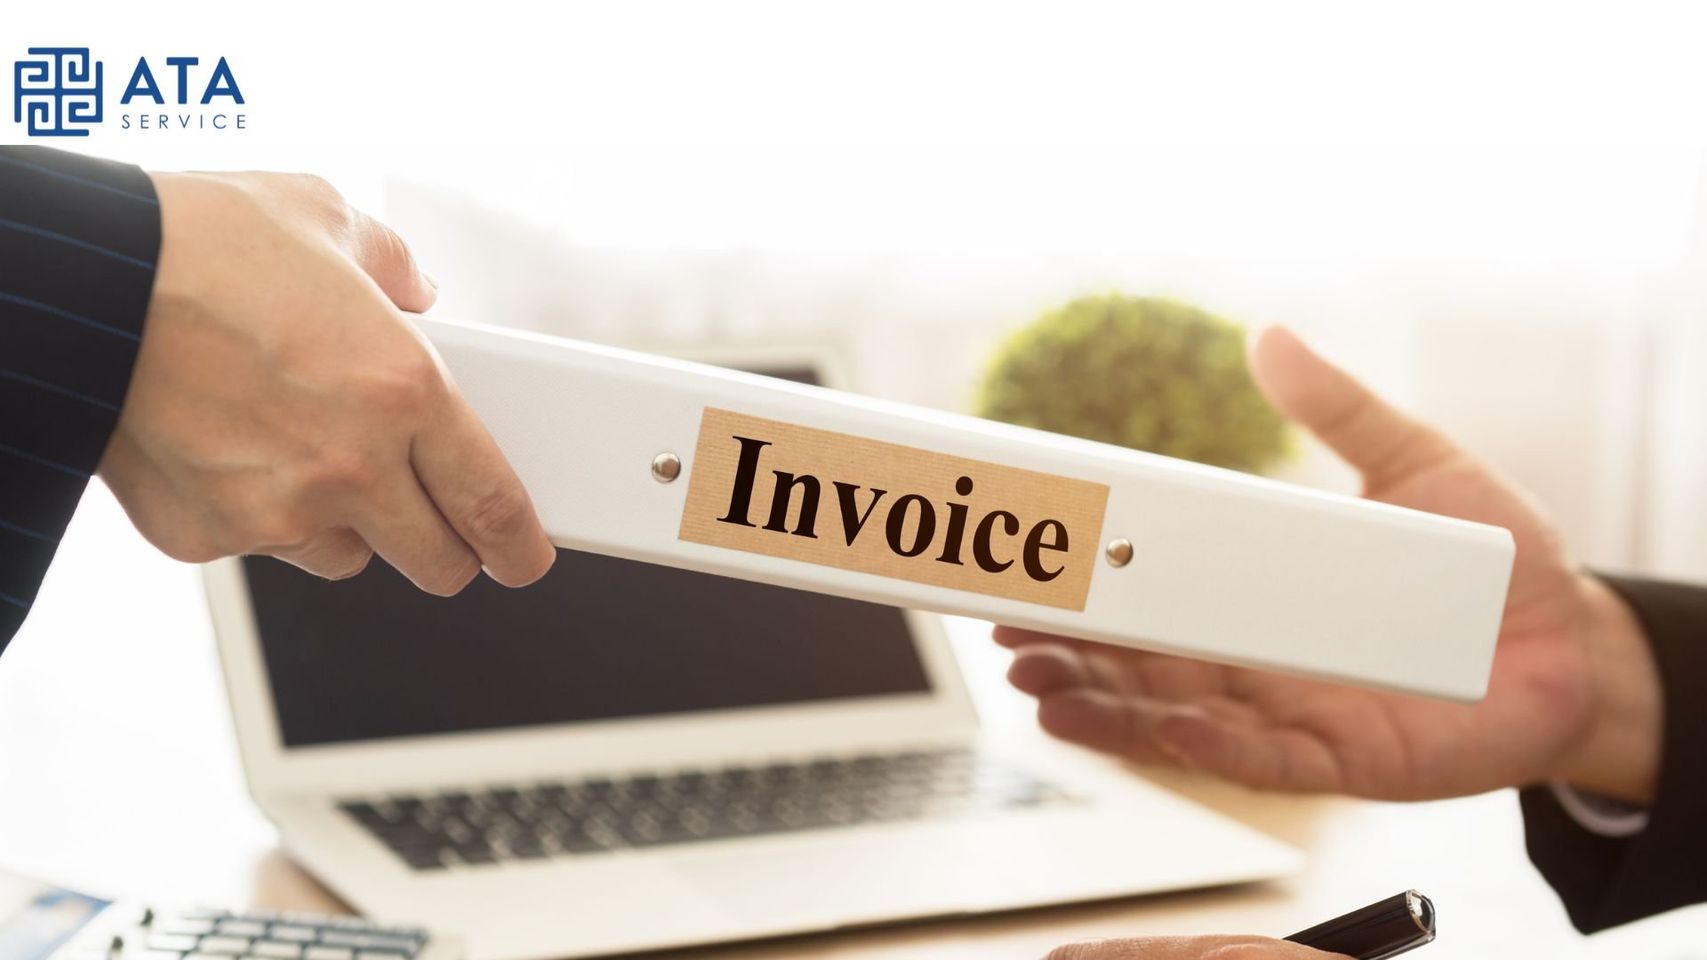 WHAT IS THE LEGAL, VALID AND REASONABLE INVOICE?